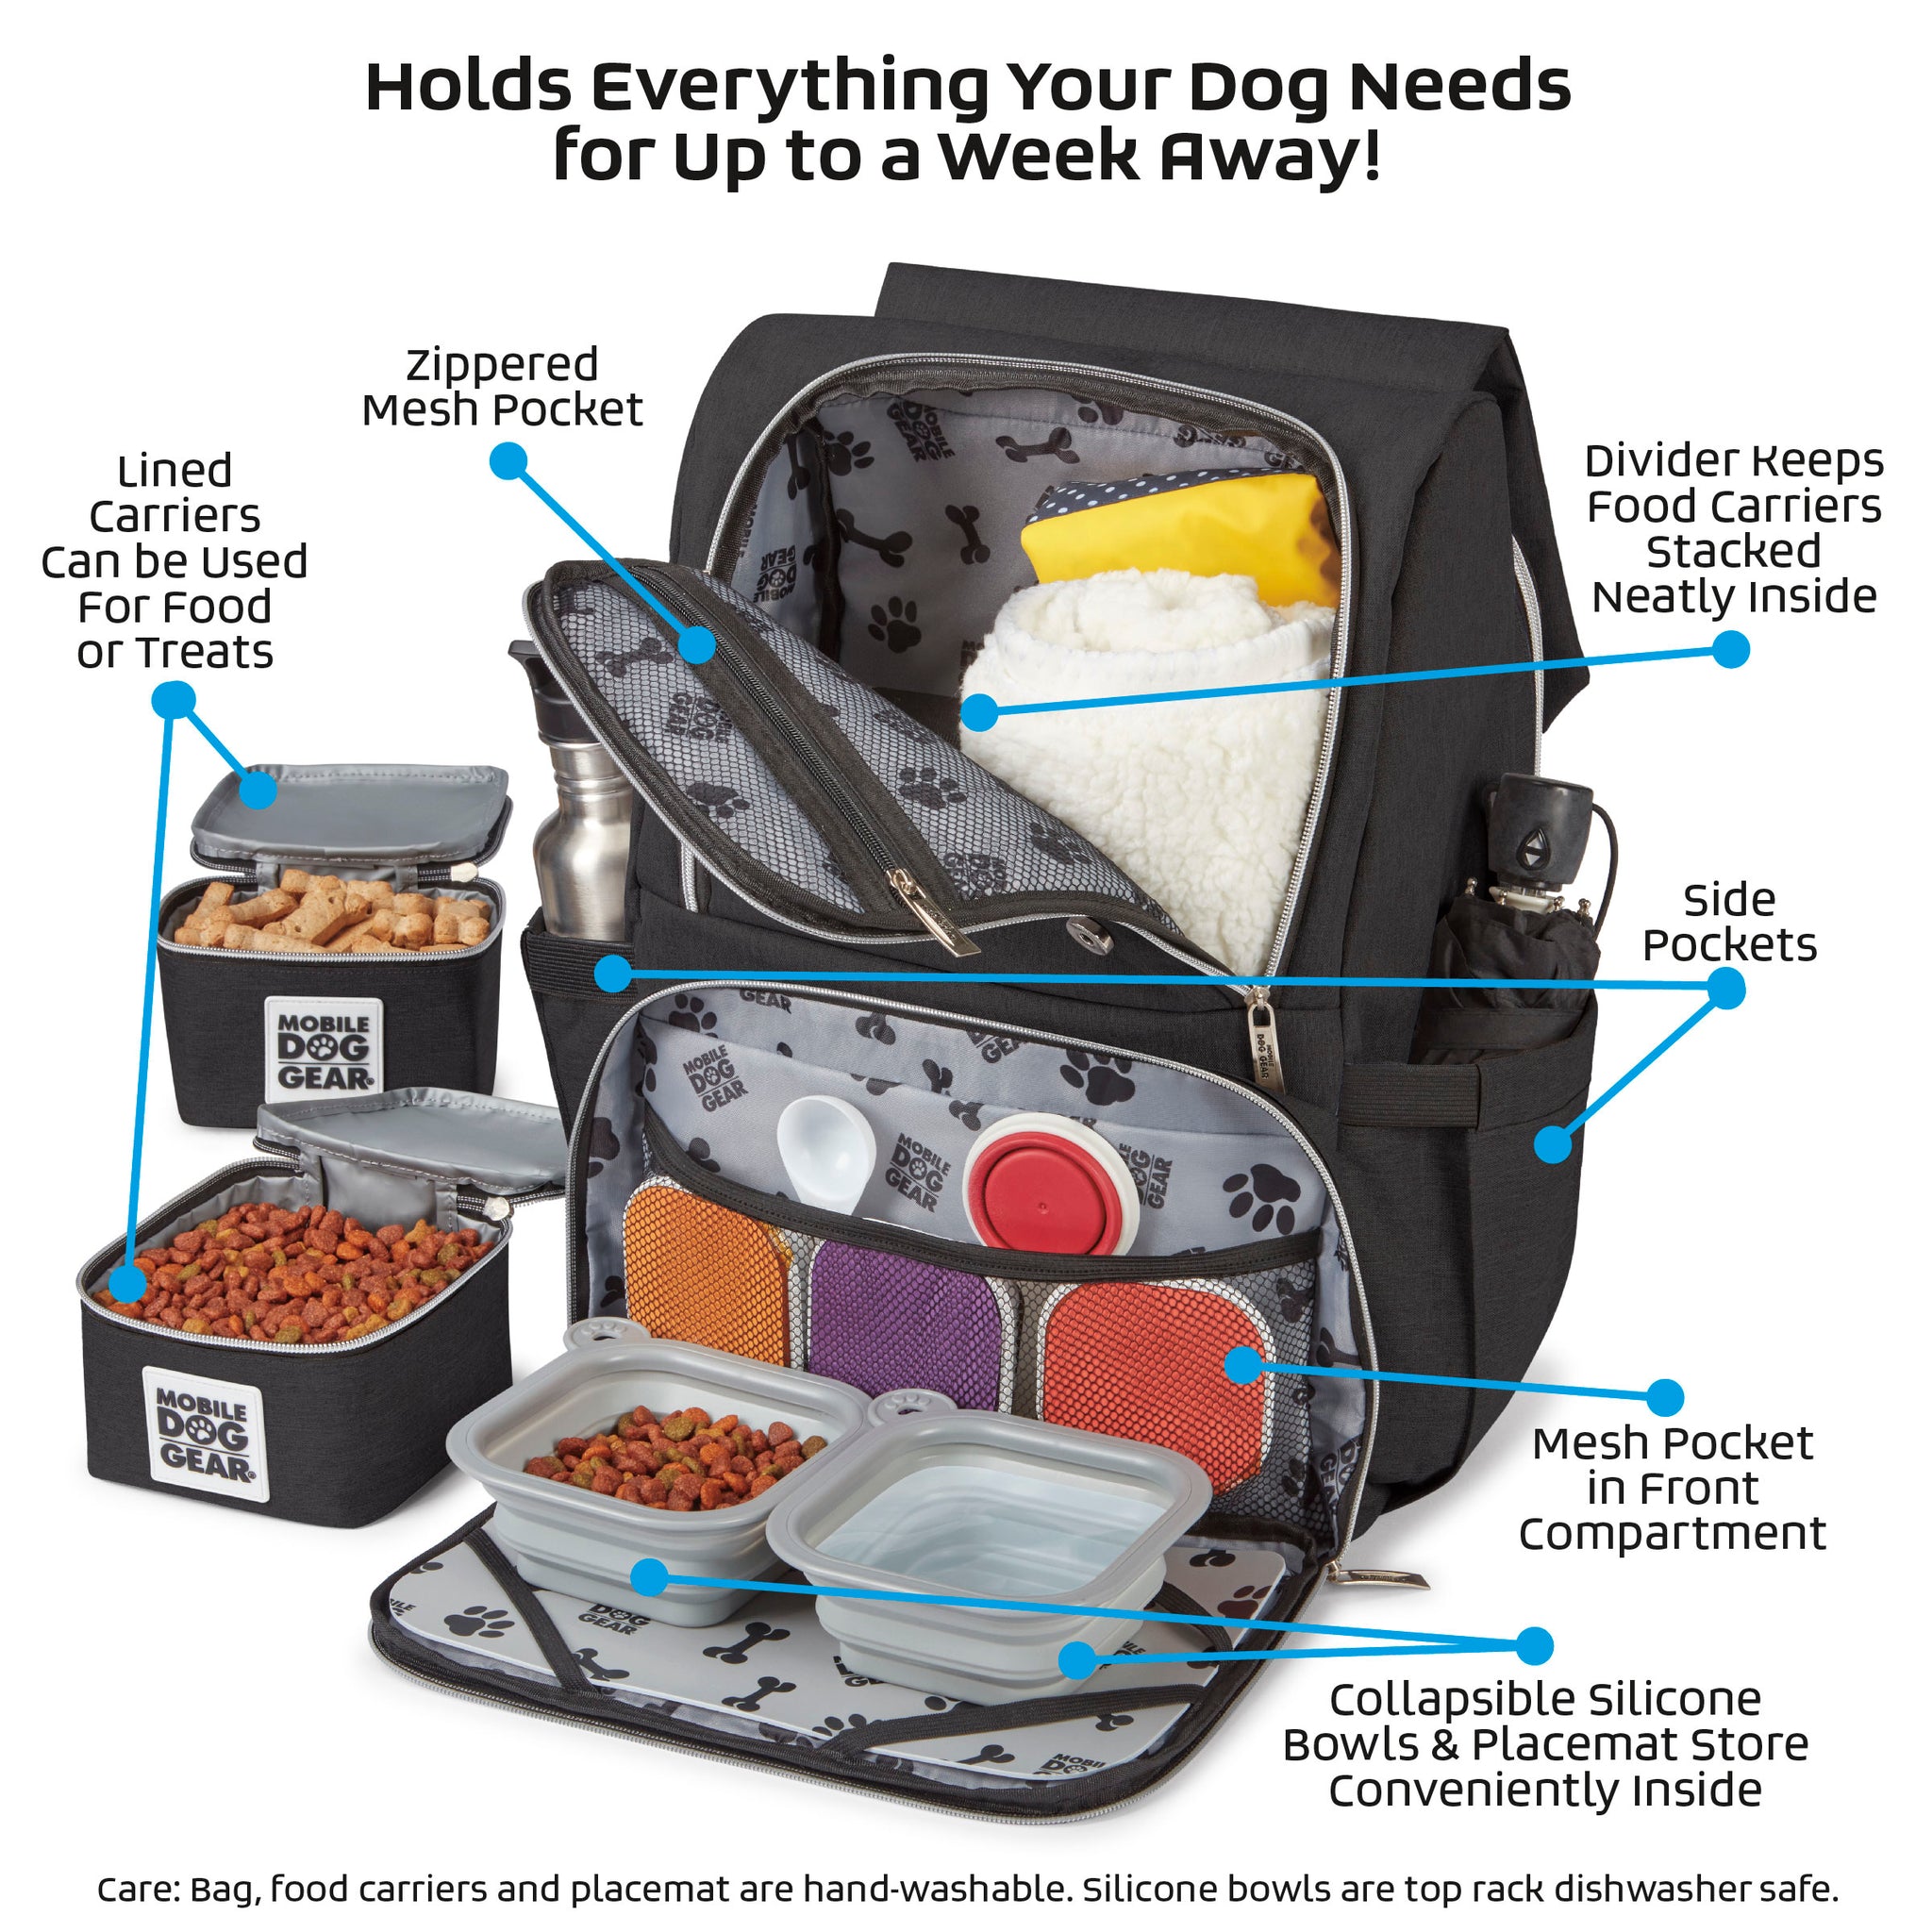 Everything needed for a week away with your dog. The Ultimate dog backpack comes equipped with lined dog food containers, dog bowls and lots of room for all your pet's belongings.